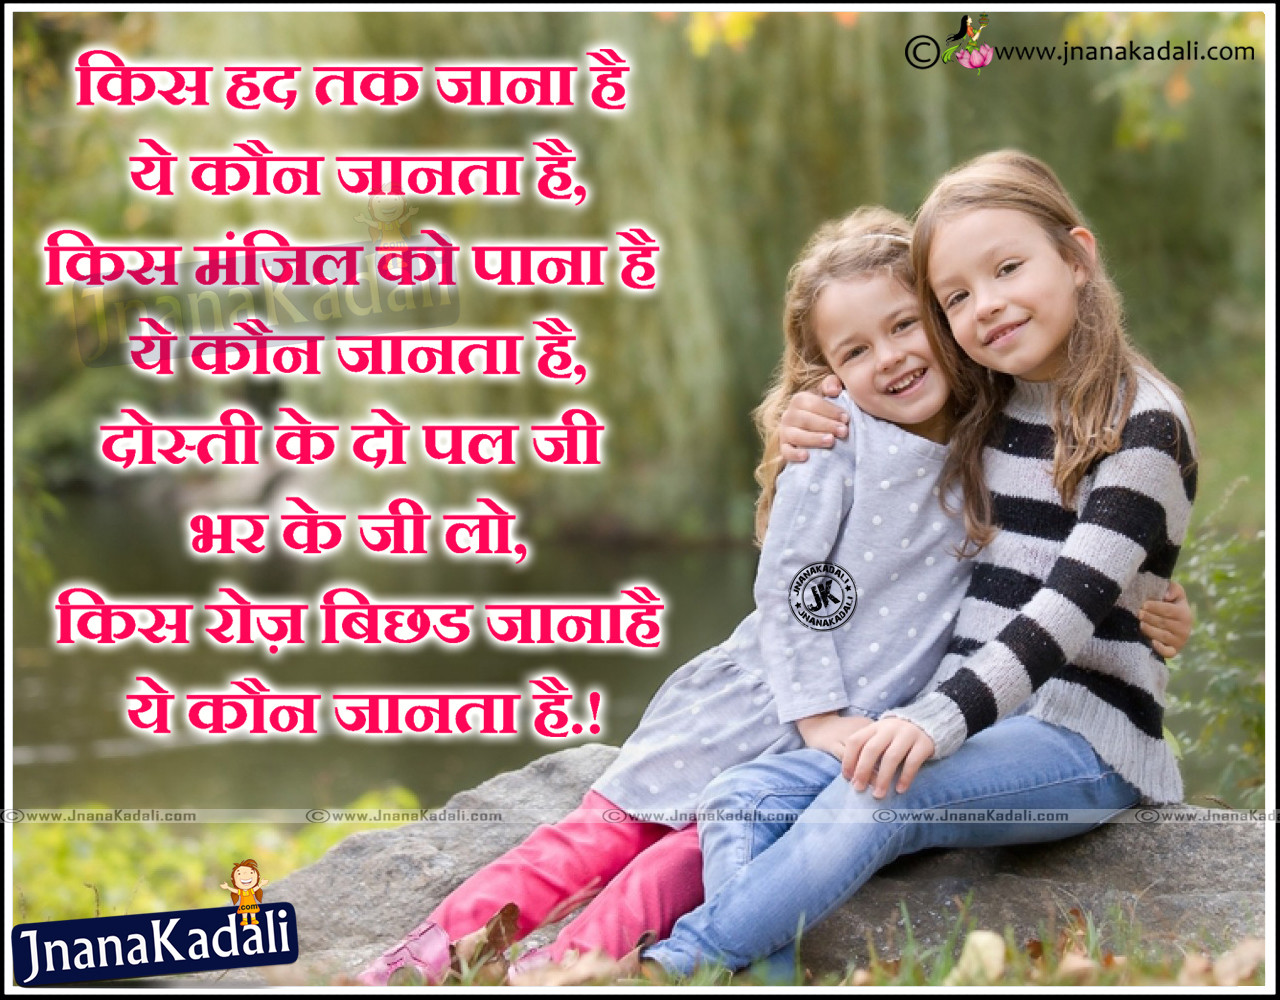 Latest Hindi Friendship quotes with cute girls hd wallpapers | JNANA   |Telugu Quotes|English quotes|Hindi quotes|Tamil  quotes|Dharmasandehalu|